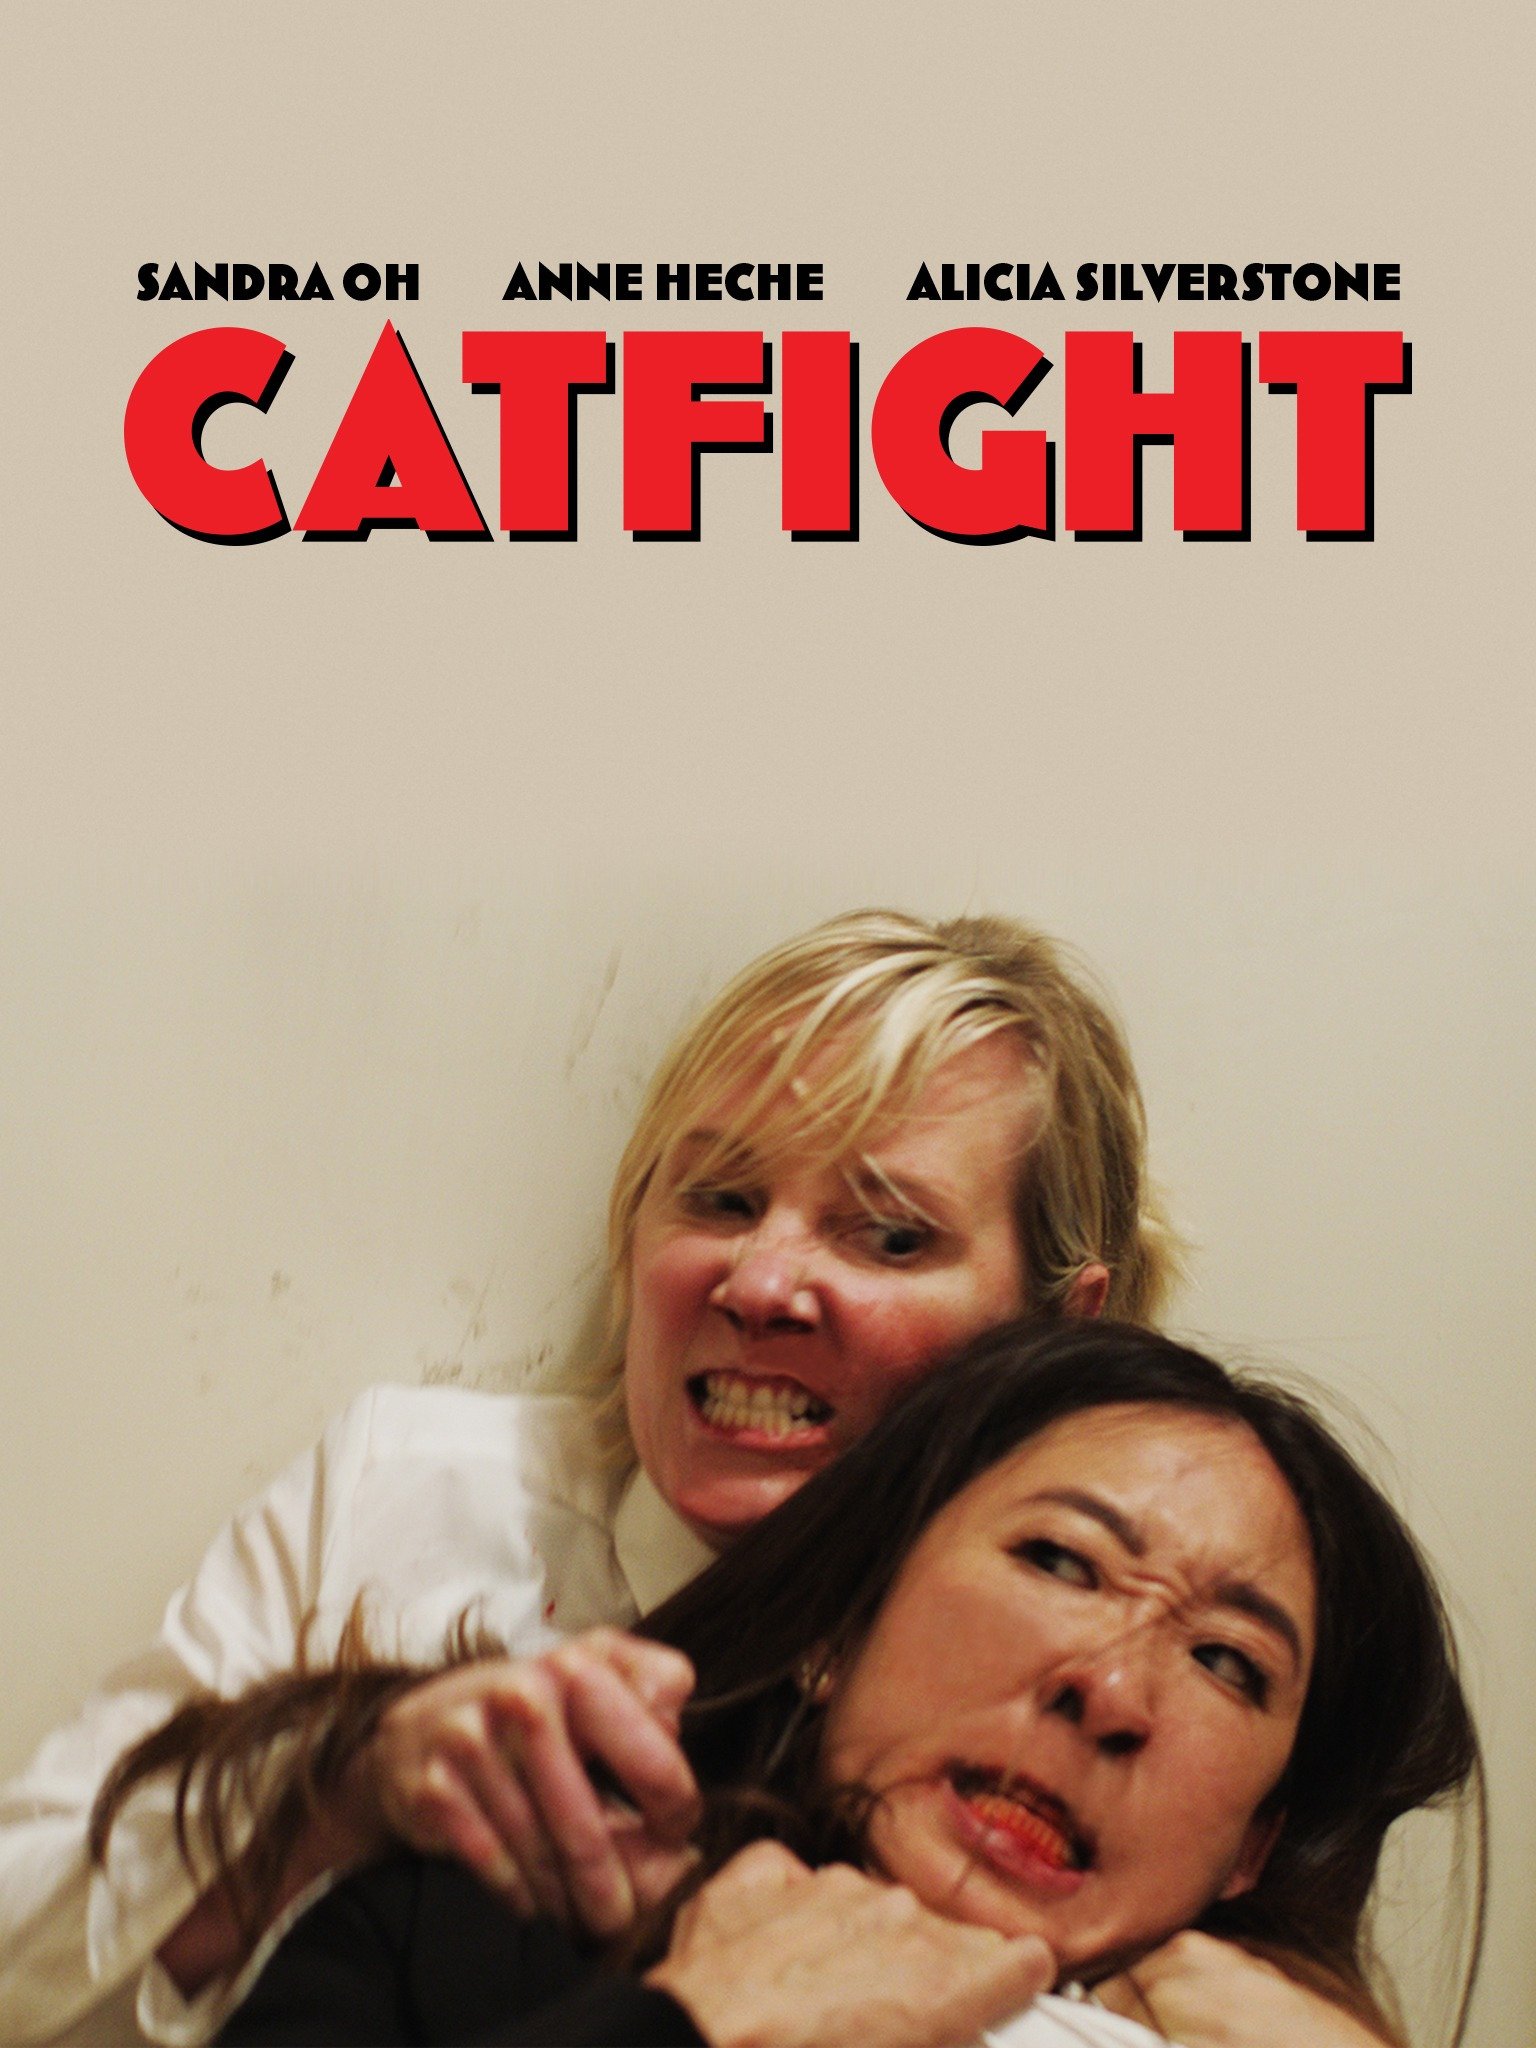 Catfight Trailer 1 Trailers And Videos Rotten Tomatoes